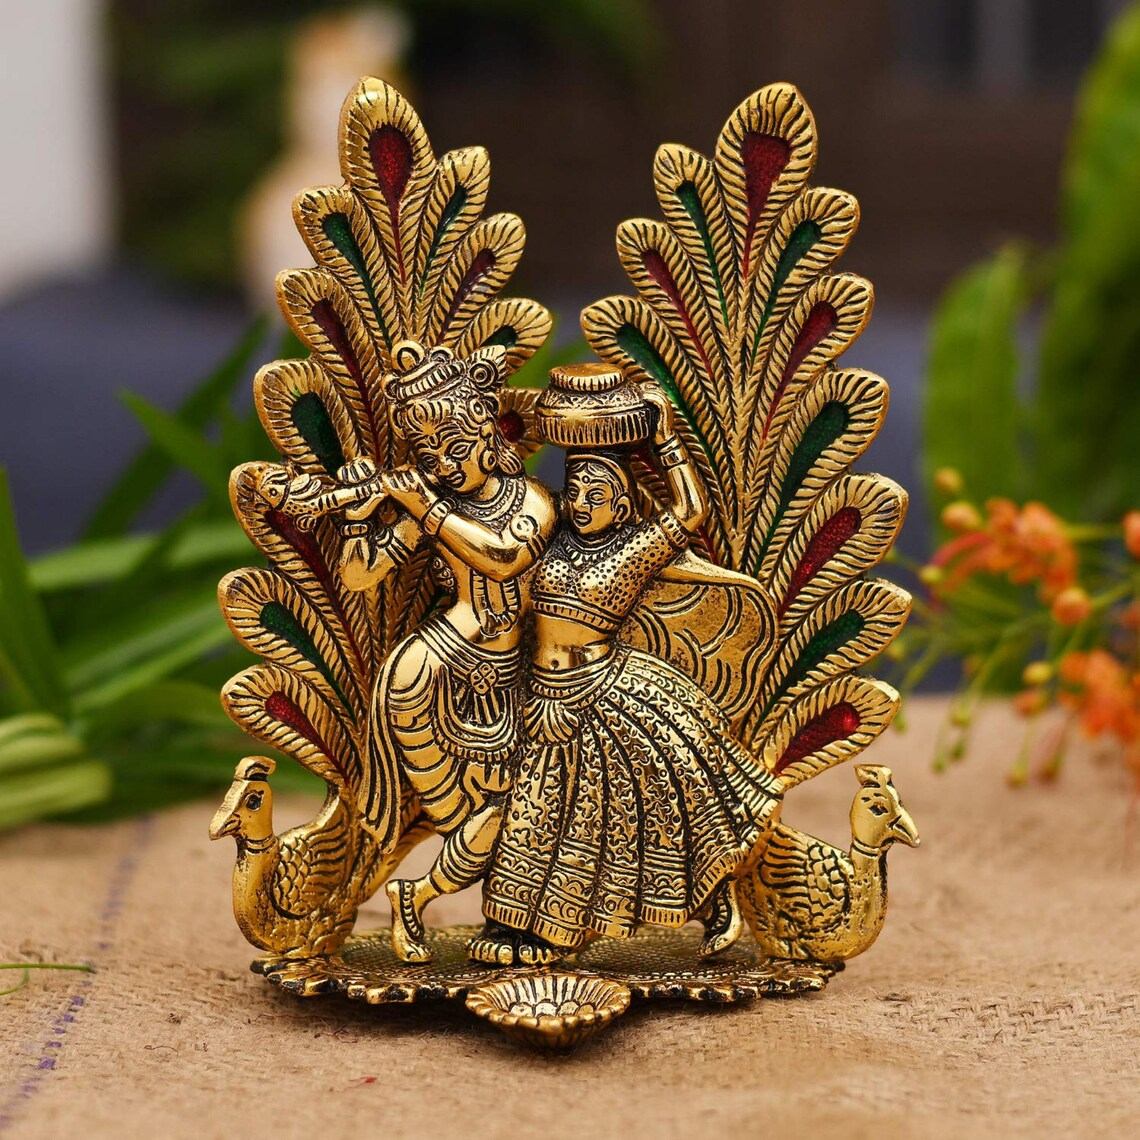 Buy KRISHNAGALLERY1Gold Plated Radha Krishan Murti Statue Idol Radhe Krishna  Shyam Idol for Home Pooja Gift Showpiece Living Room Office Décor 7 Inch  Online at Low Prices in India - Amazon.in